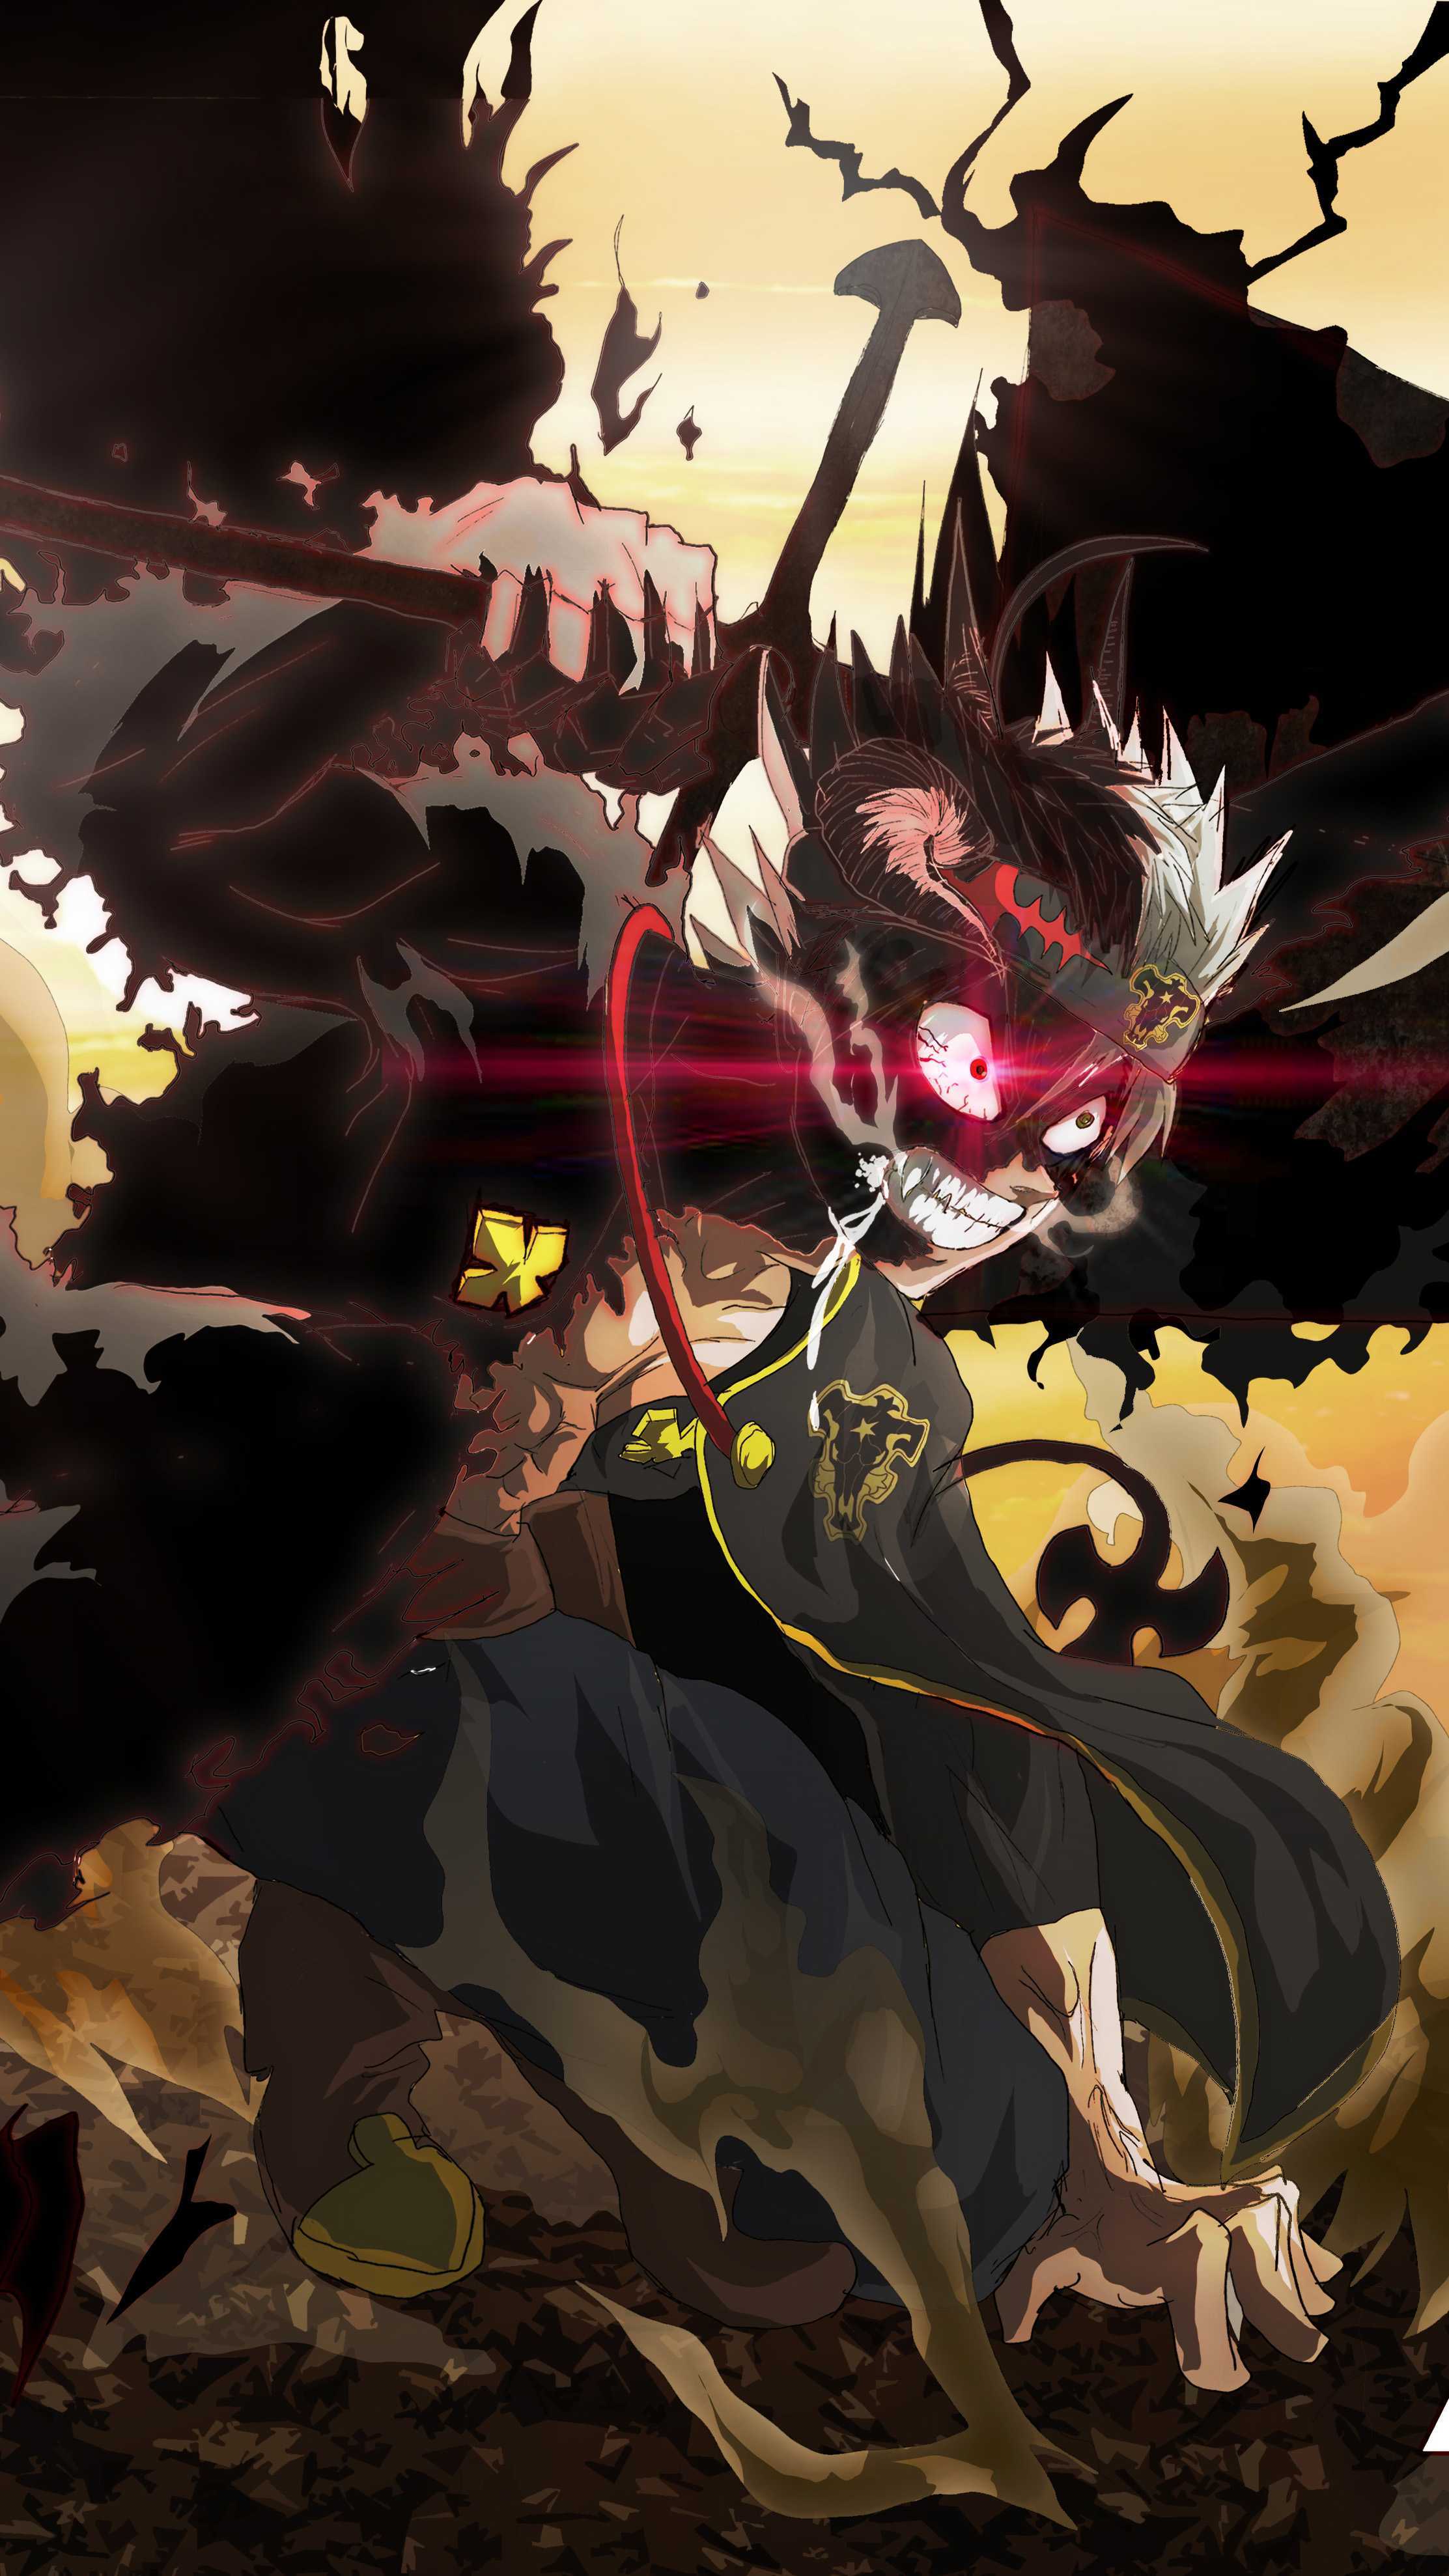 Asta (Black Clover) wallpapers for desktop, download free Asta (Black  Clover) pictures and backgrounds for PC